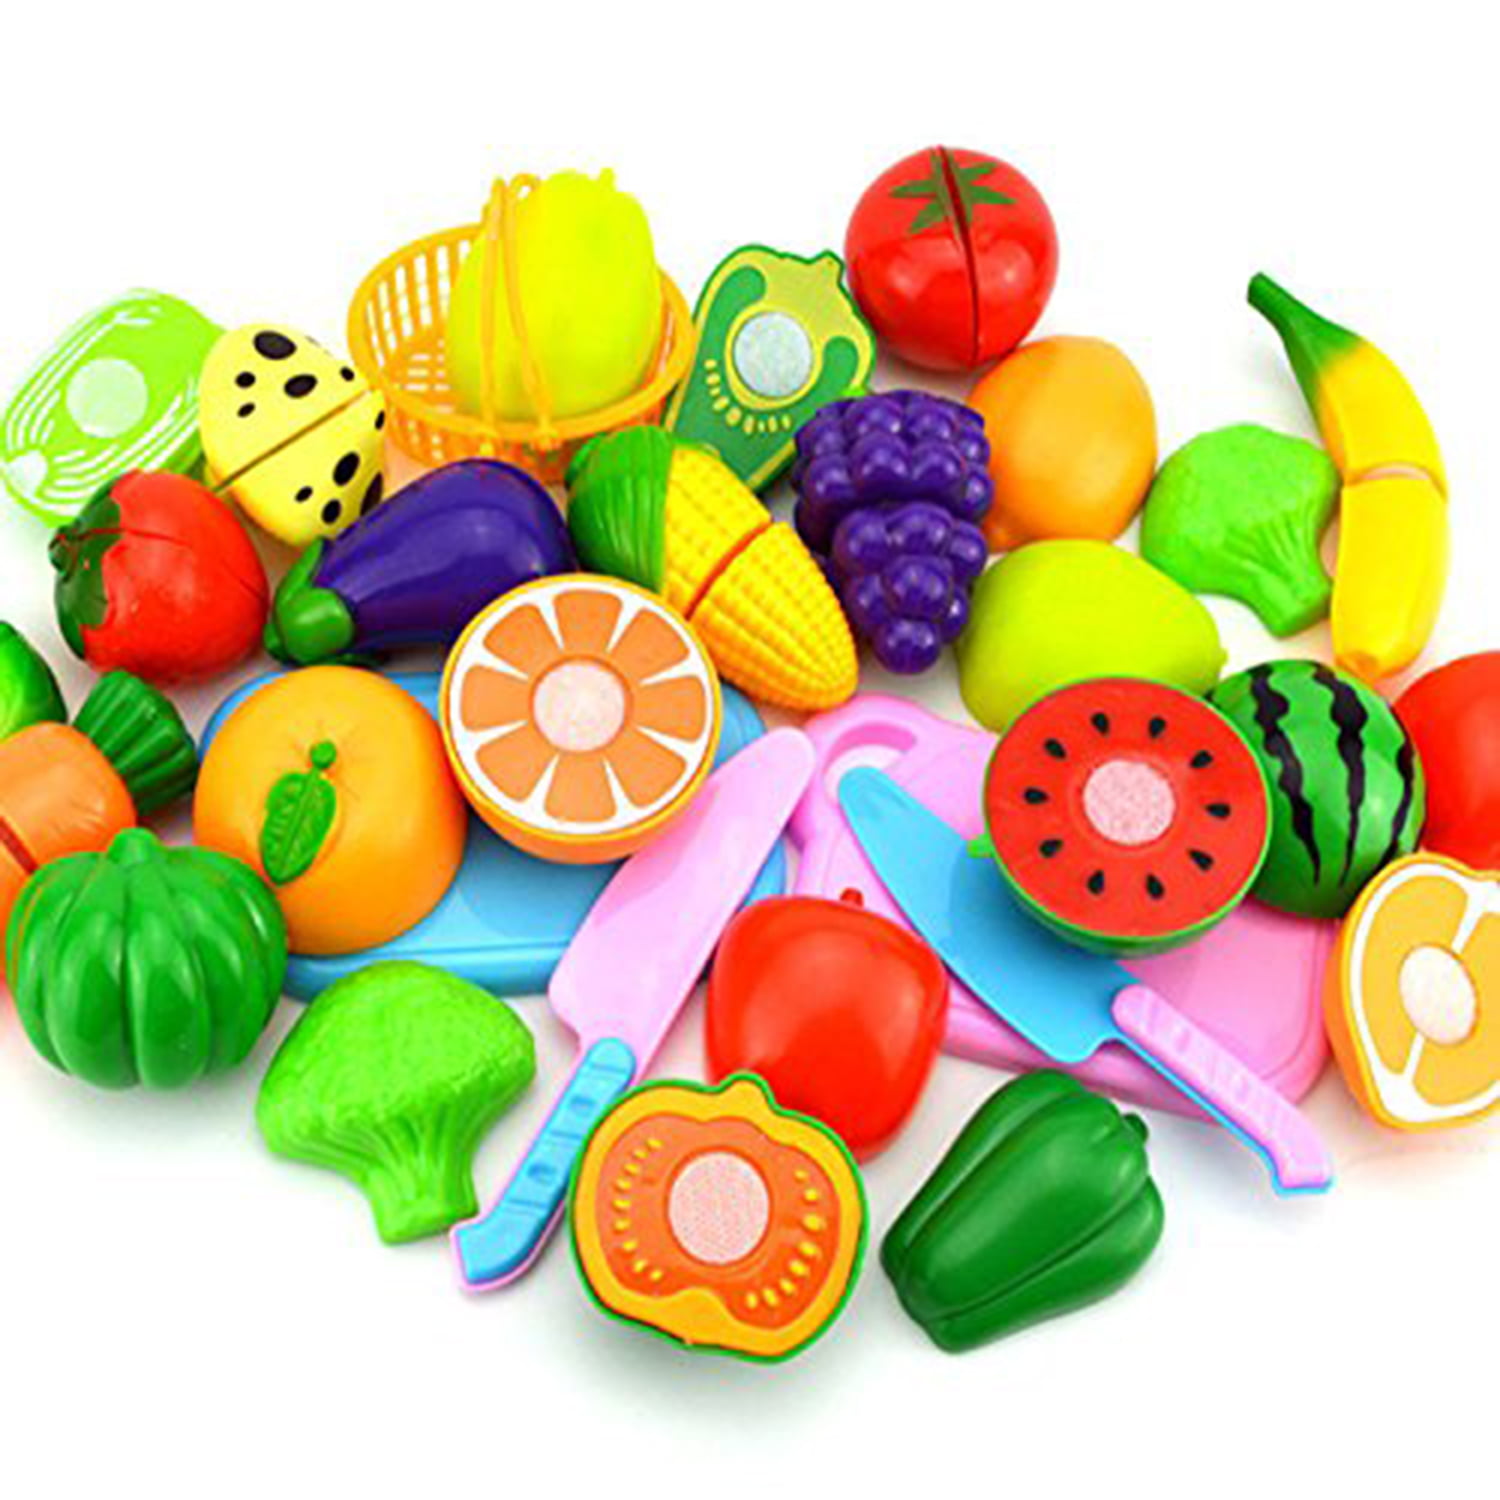 Toy Play Fruit Food Pretend Vegetable Kitchen Cutting Set Role Kids Child GifD_N 